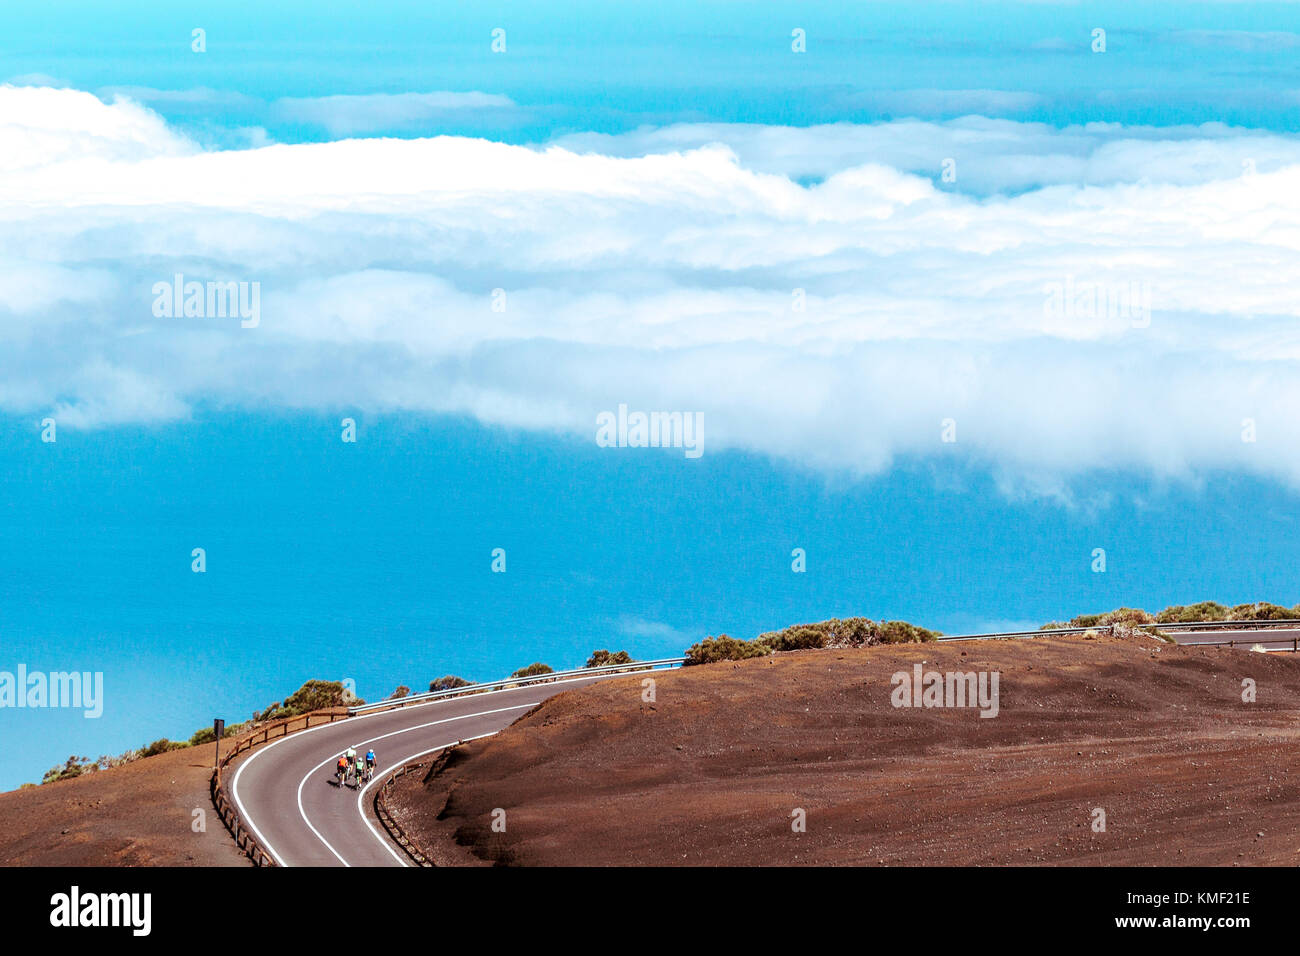 Cyclists pedaling on winding mountain road above clouds,Teide National Park,Tenerife,Canary Islands,Spain Stock Photo